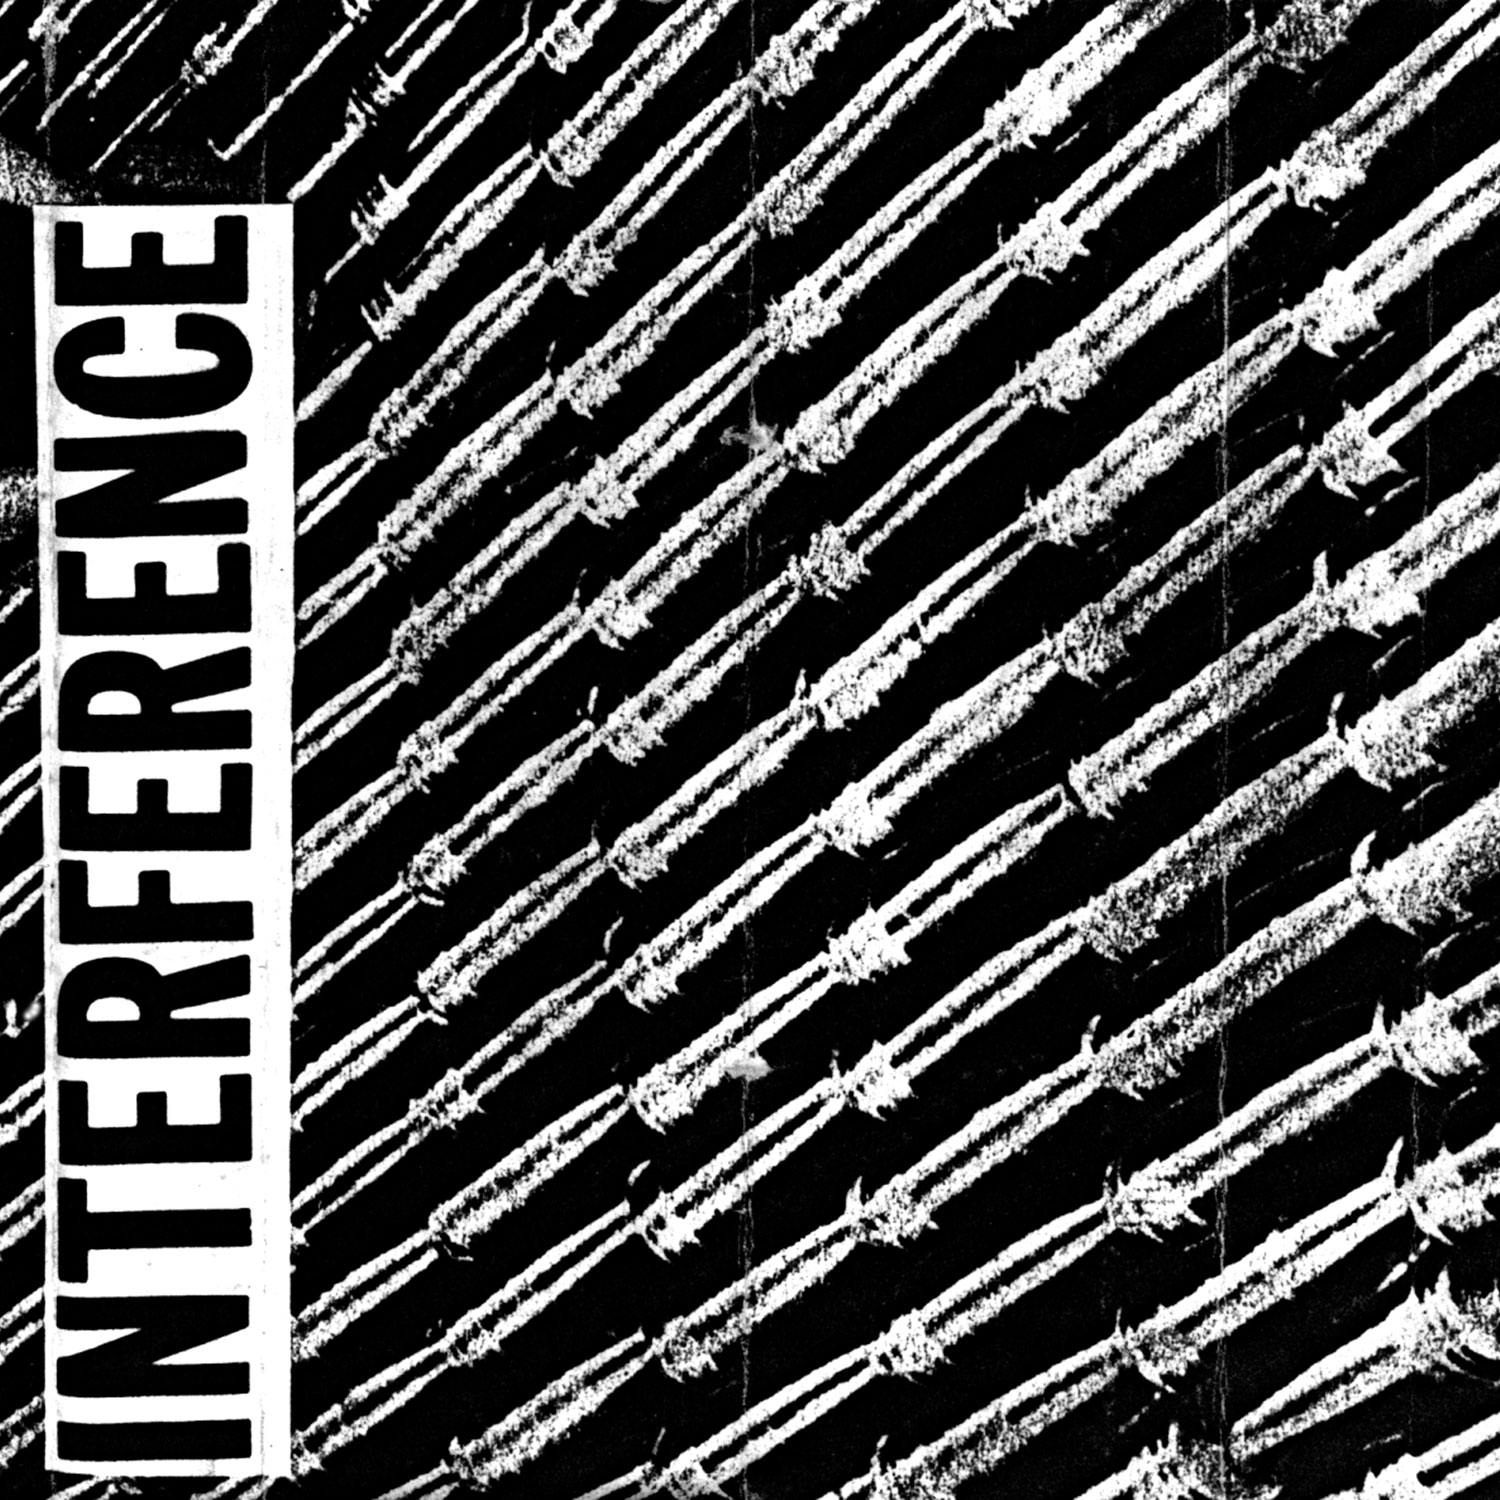 INTERFERENCE Album - 1982 auf THE SOCIAL REGISTRY